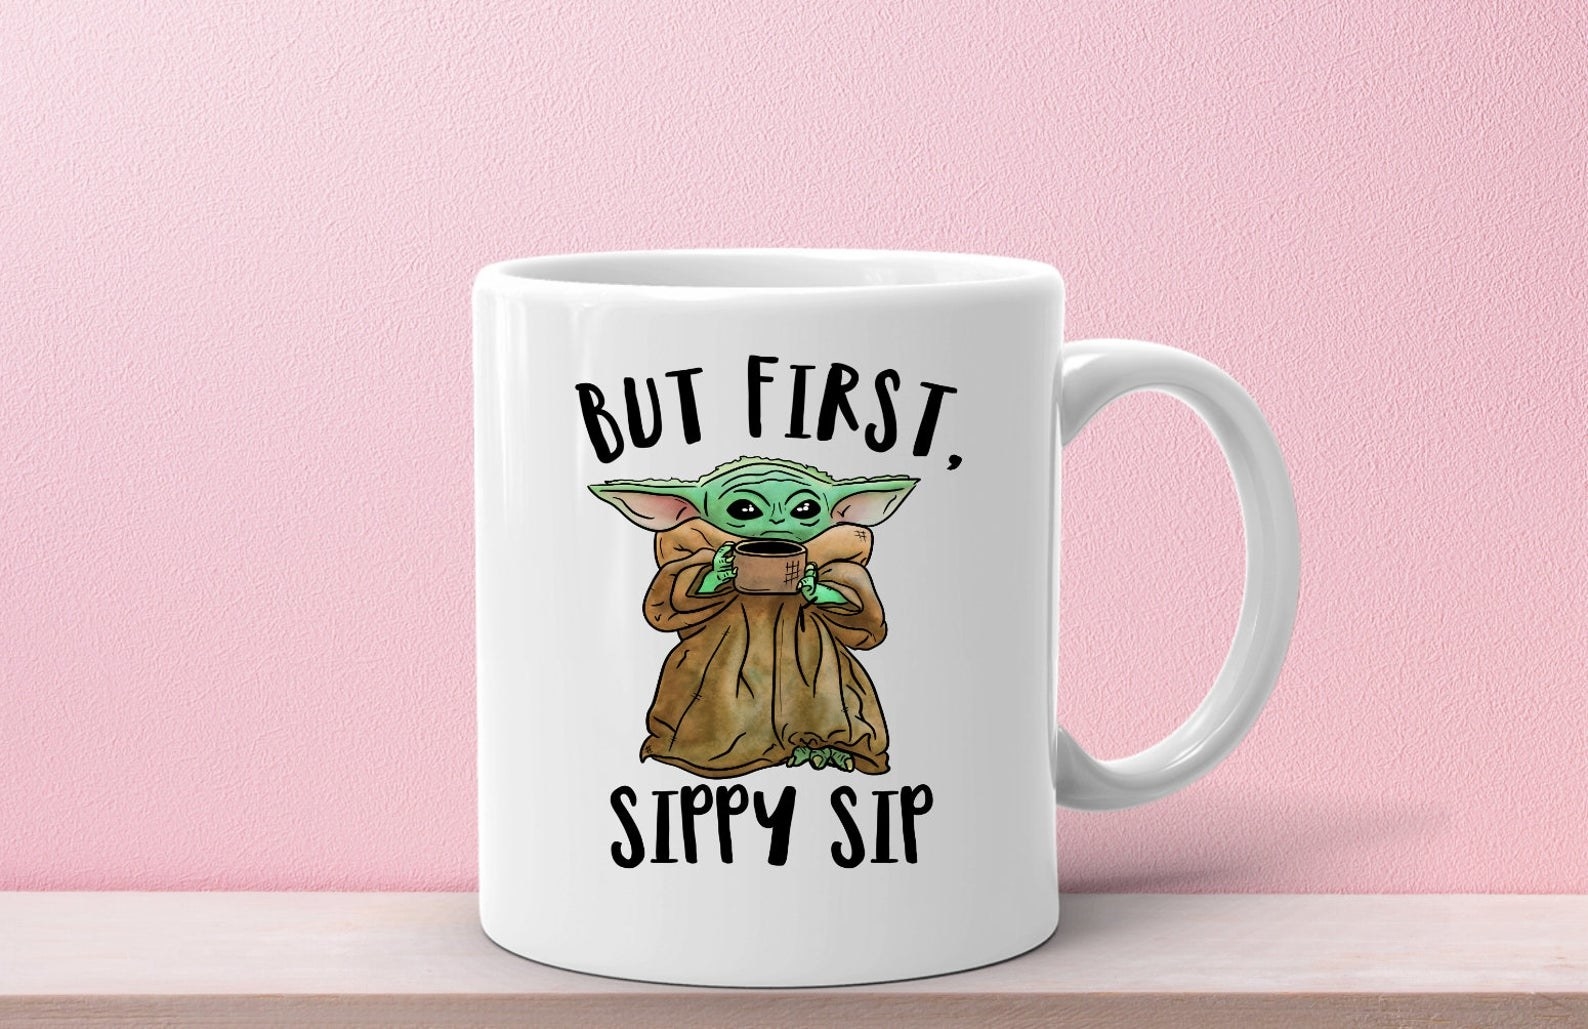 mug with baby yoda cartoon on it sipping from his own little mug. Words say, "But first, sippy sip." Awww!